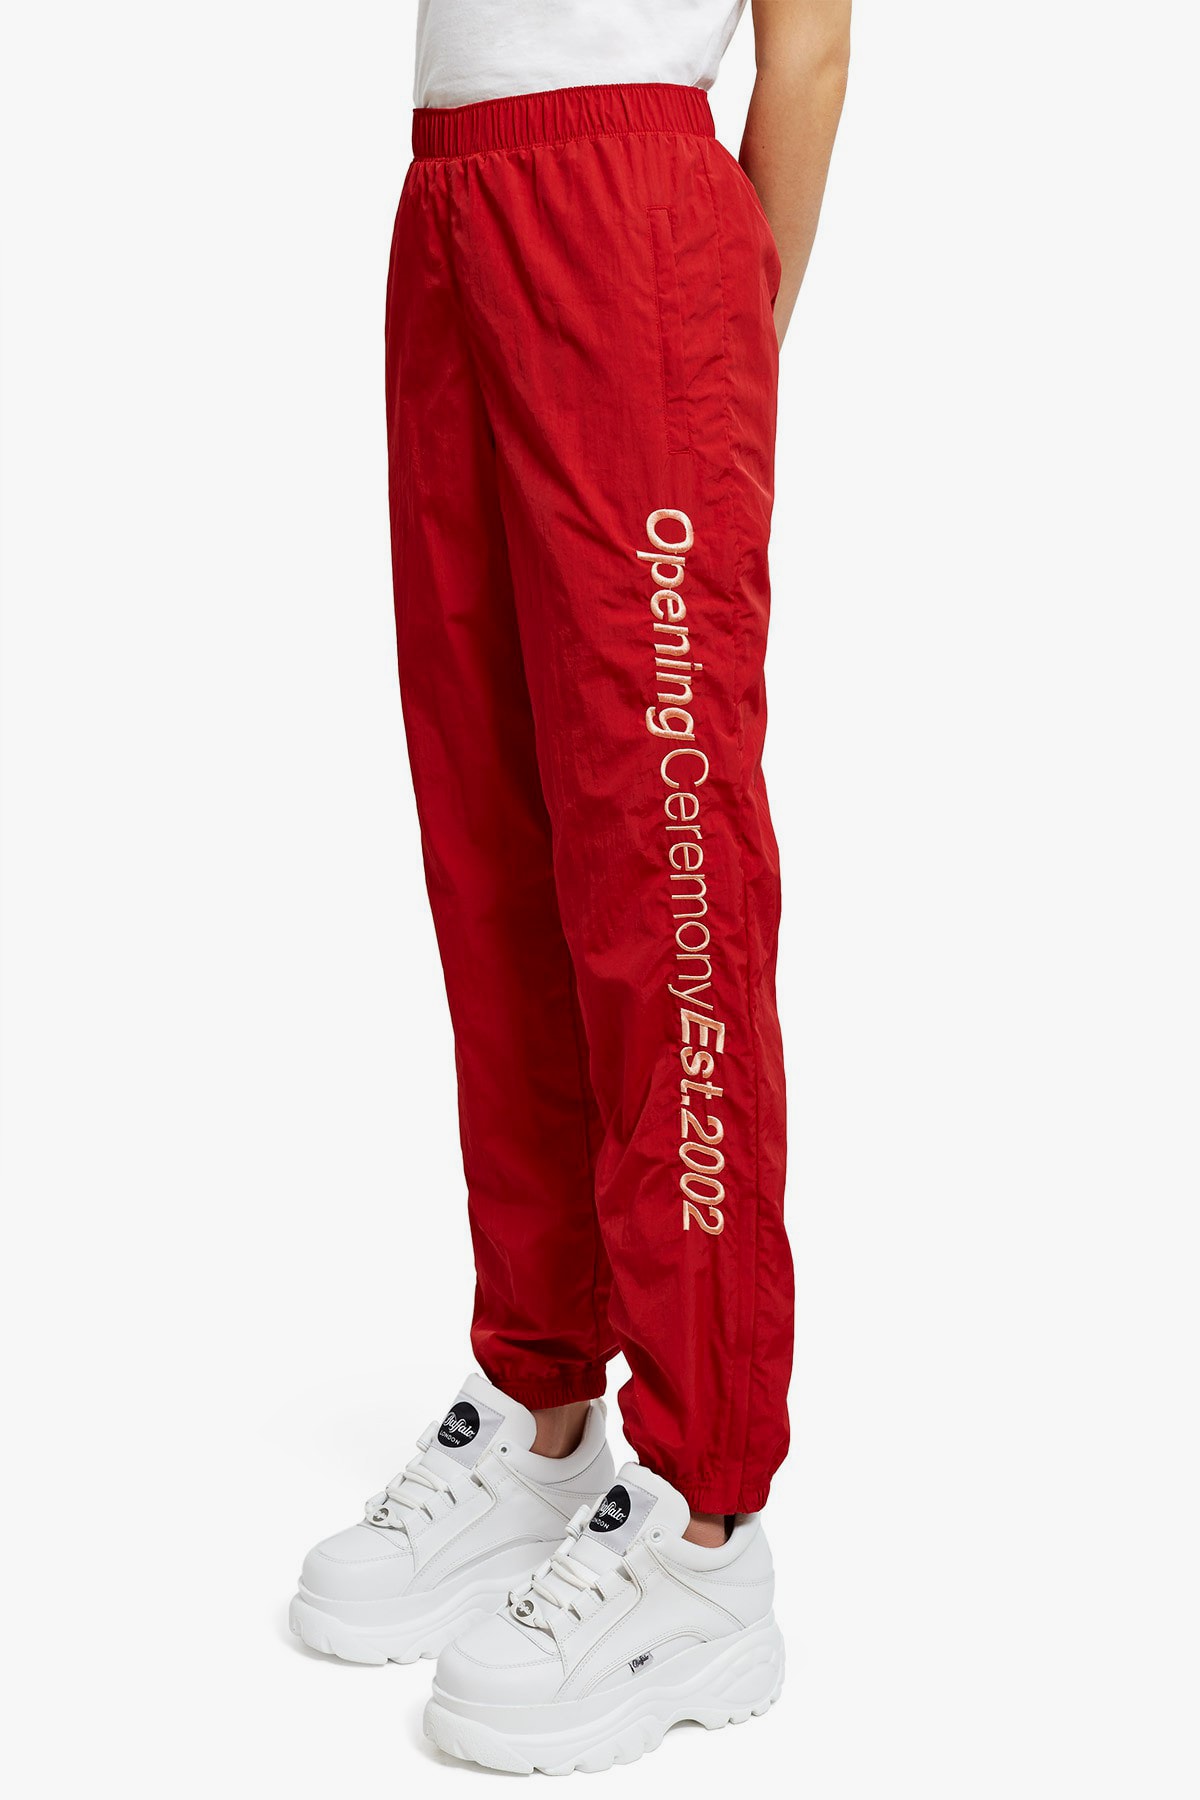 Opening Ceremony Jog Pant Red